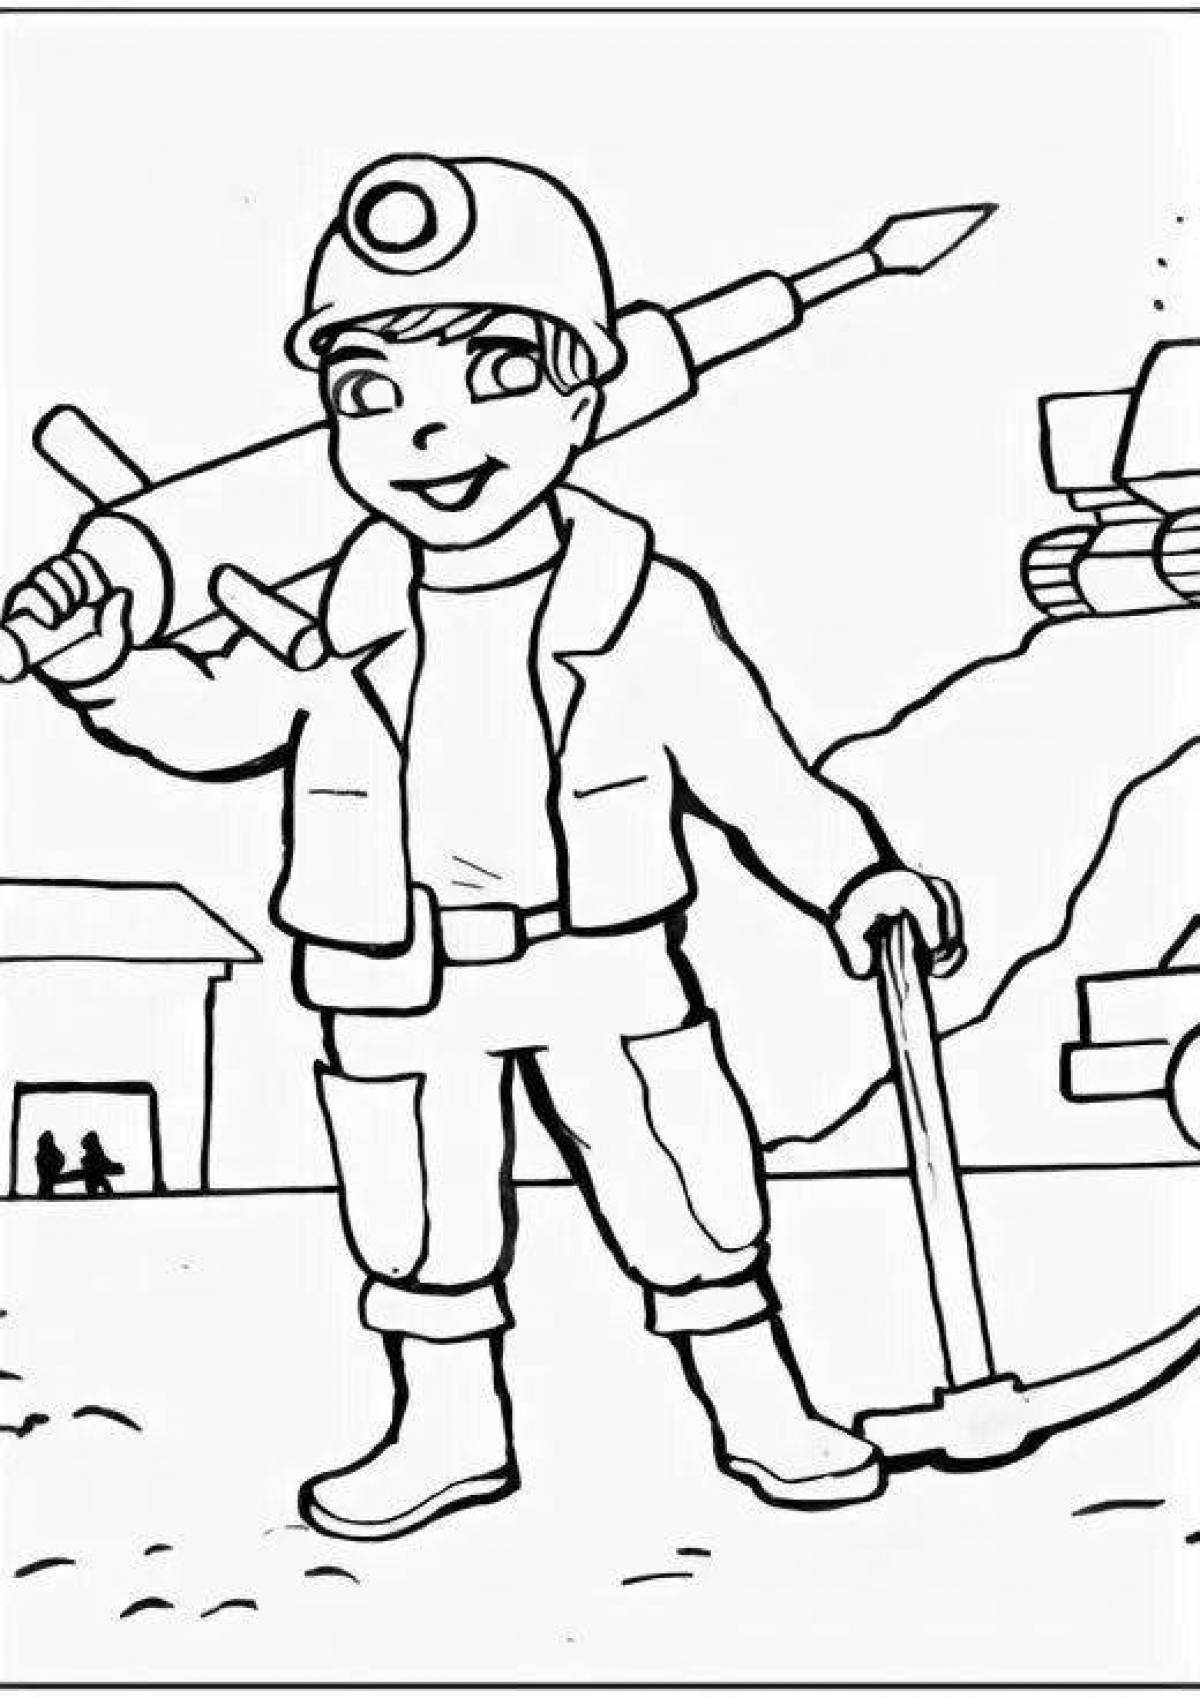 Miner's dreamy coloring book